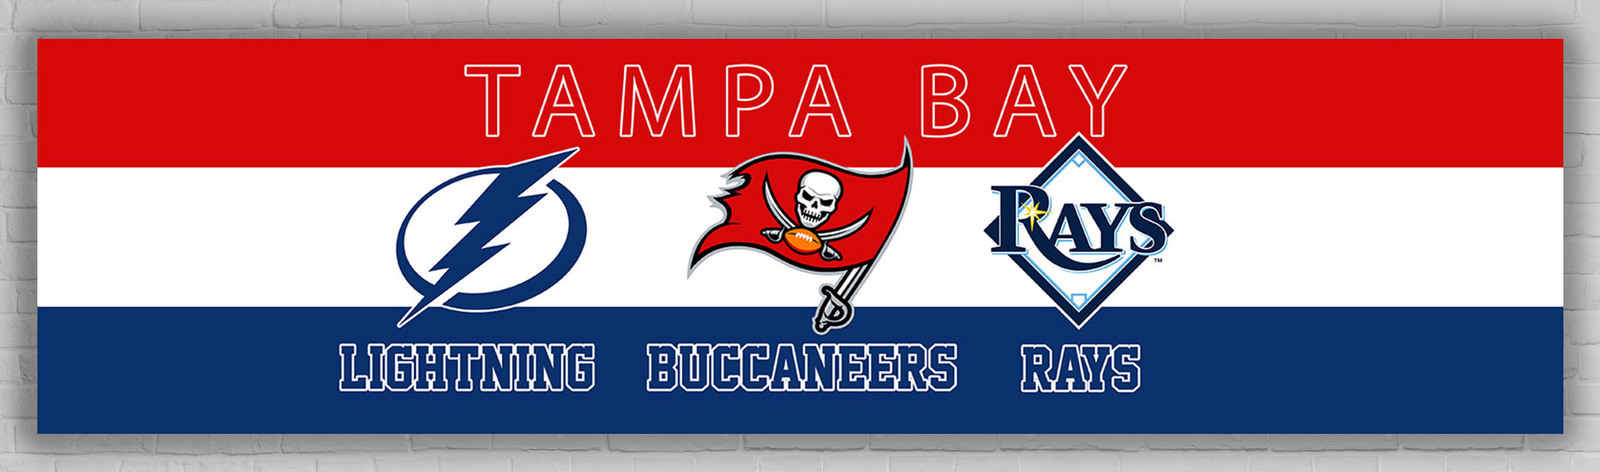 Tampa Bay Lightning, Buccaneers, Rays Tampa City Flag 90x150cm 3x5ft Best  Banner